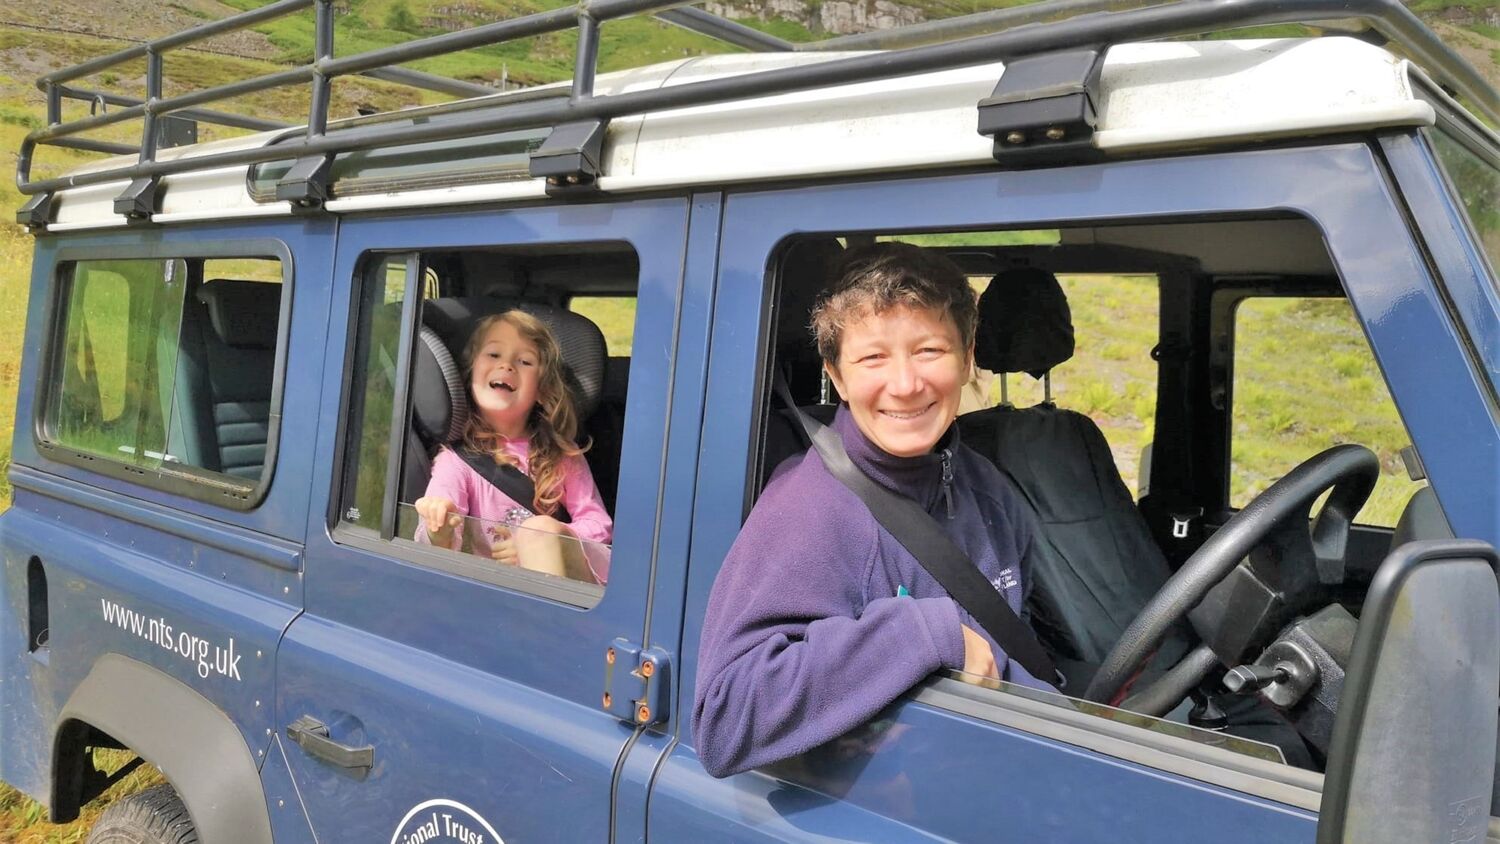 A National Trust for Scotland ranger sits in the driver's seat of a Land Rover, and leans through the open window. A young girl sits in a car seat in the back, smiling.